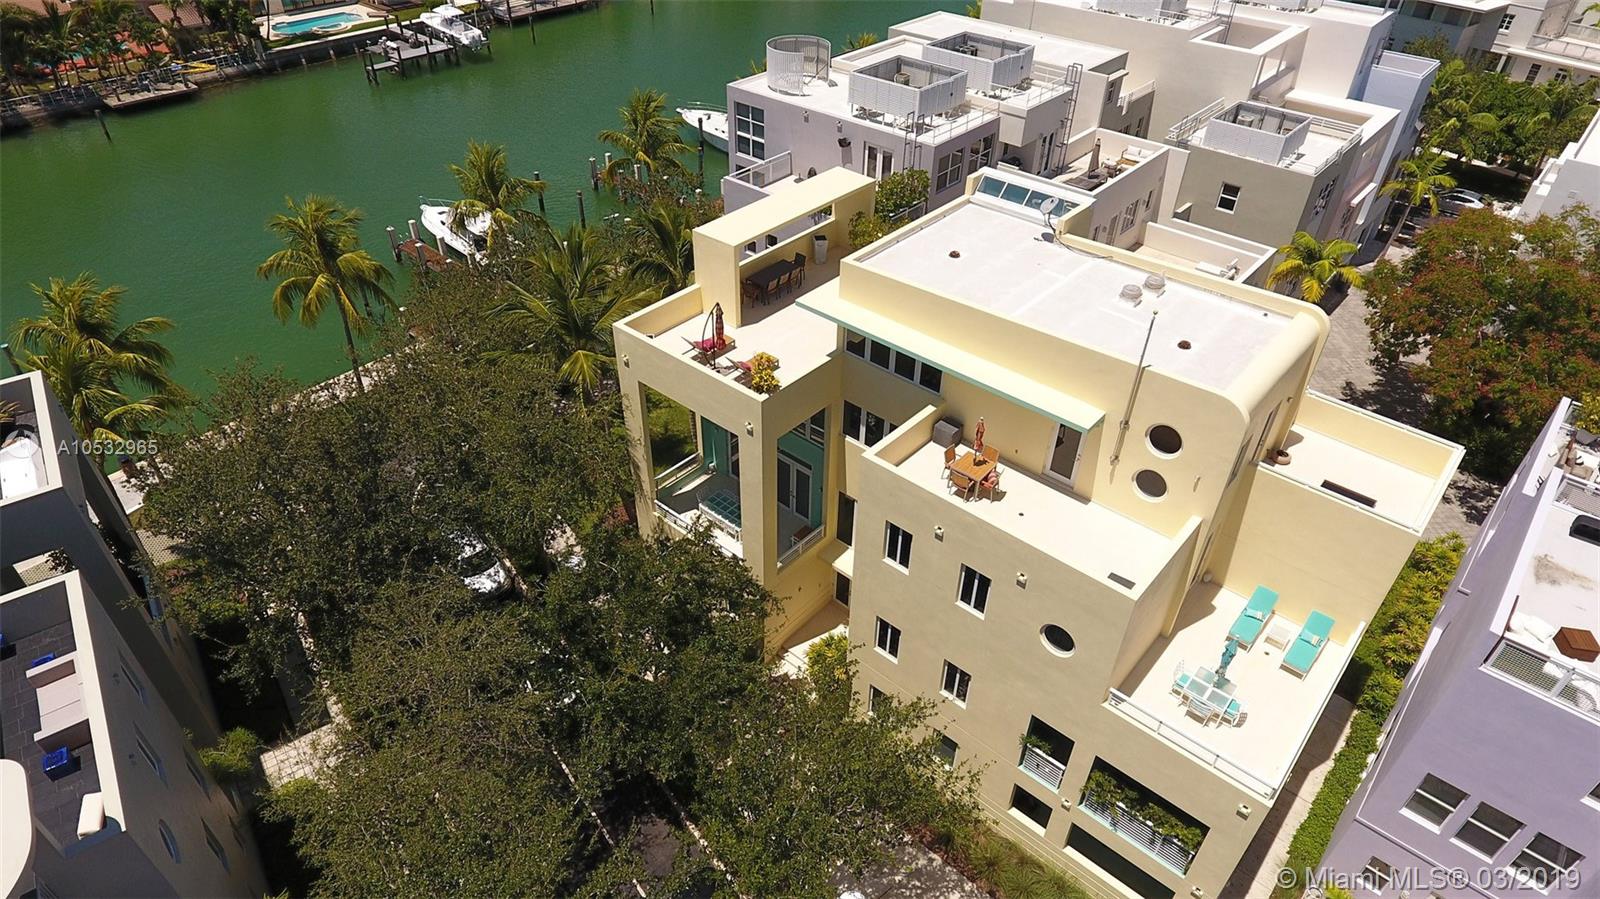 aerial view of a house with outdoor space and lake view